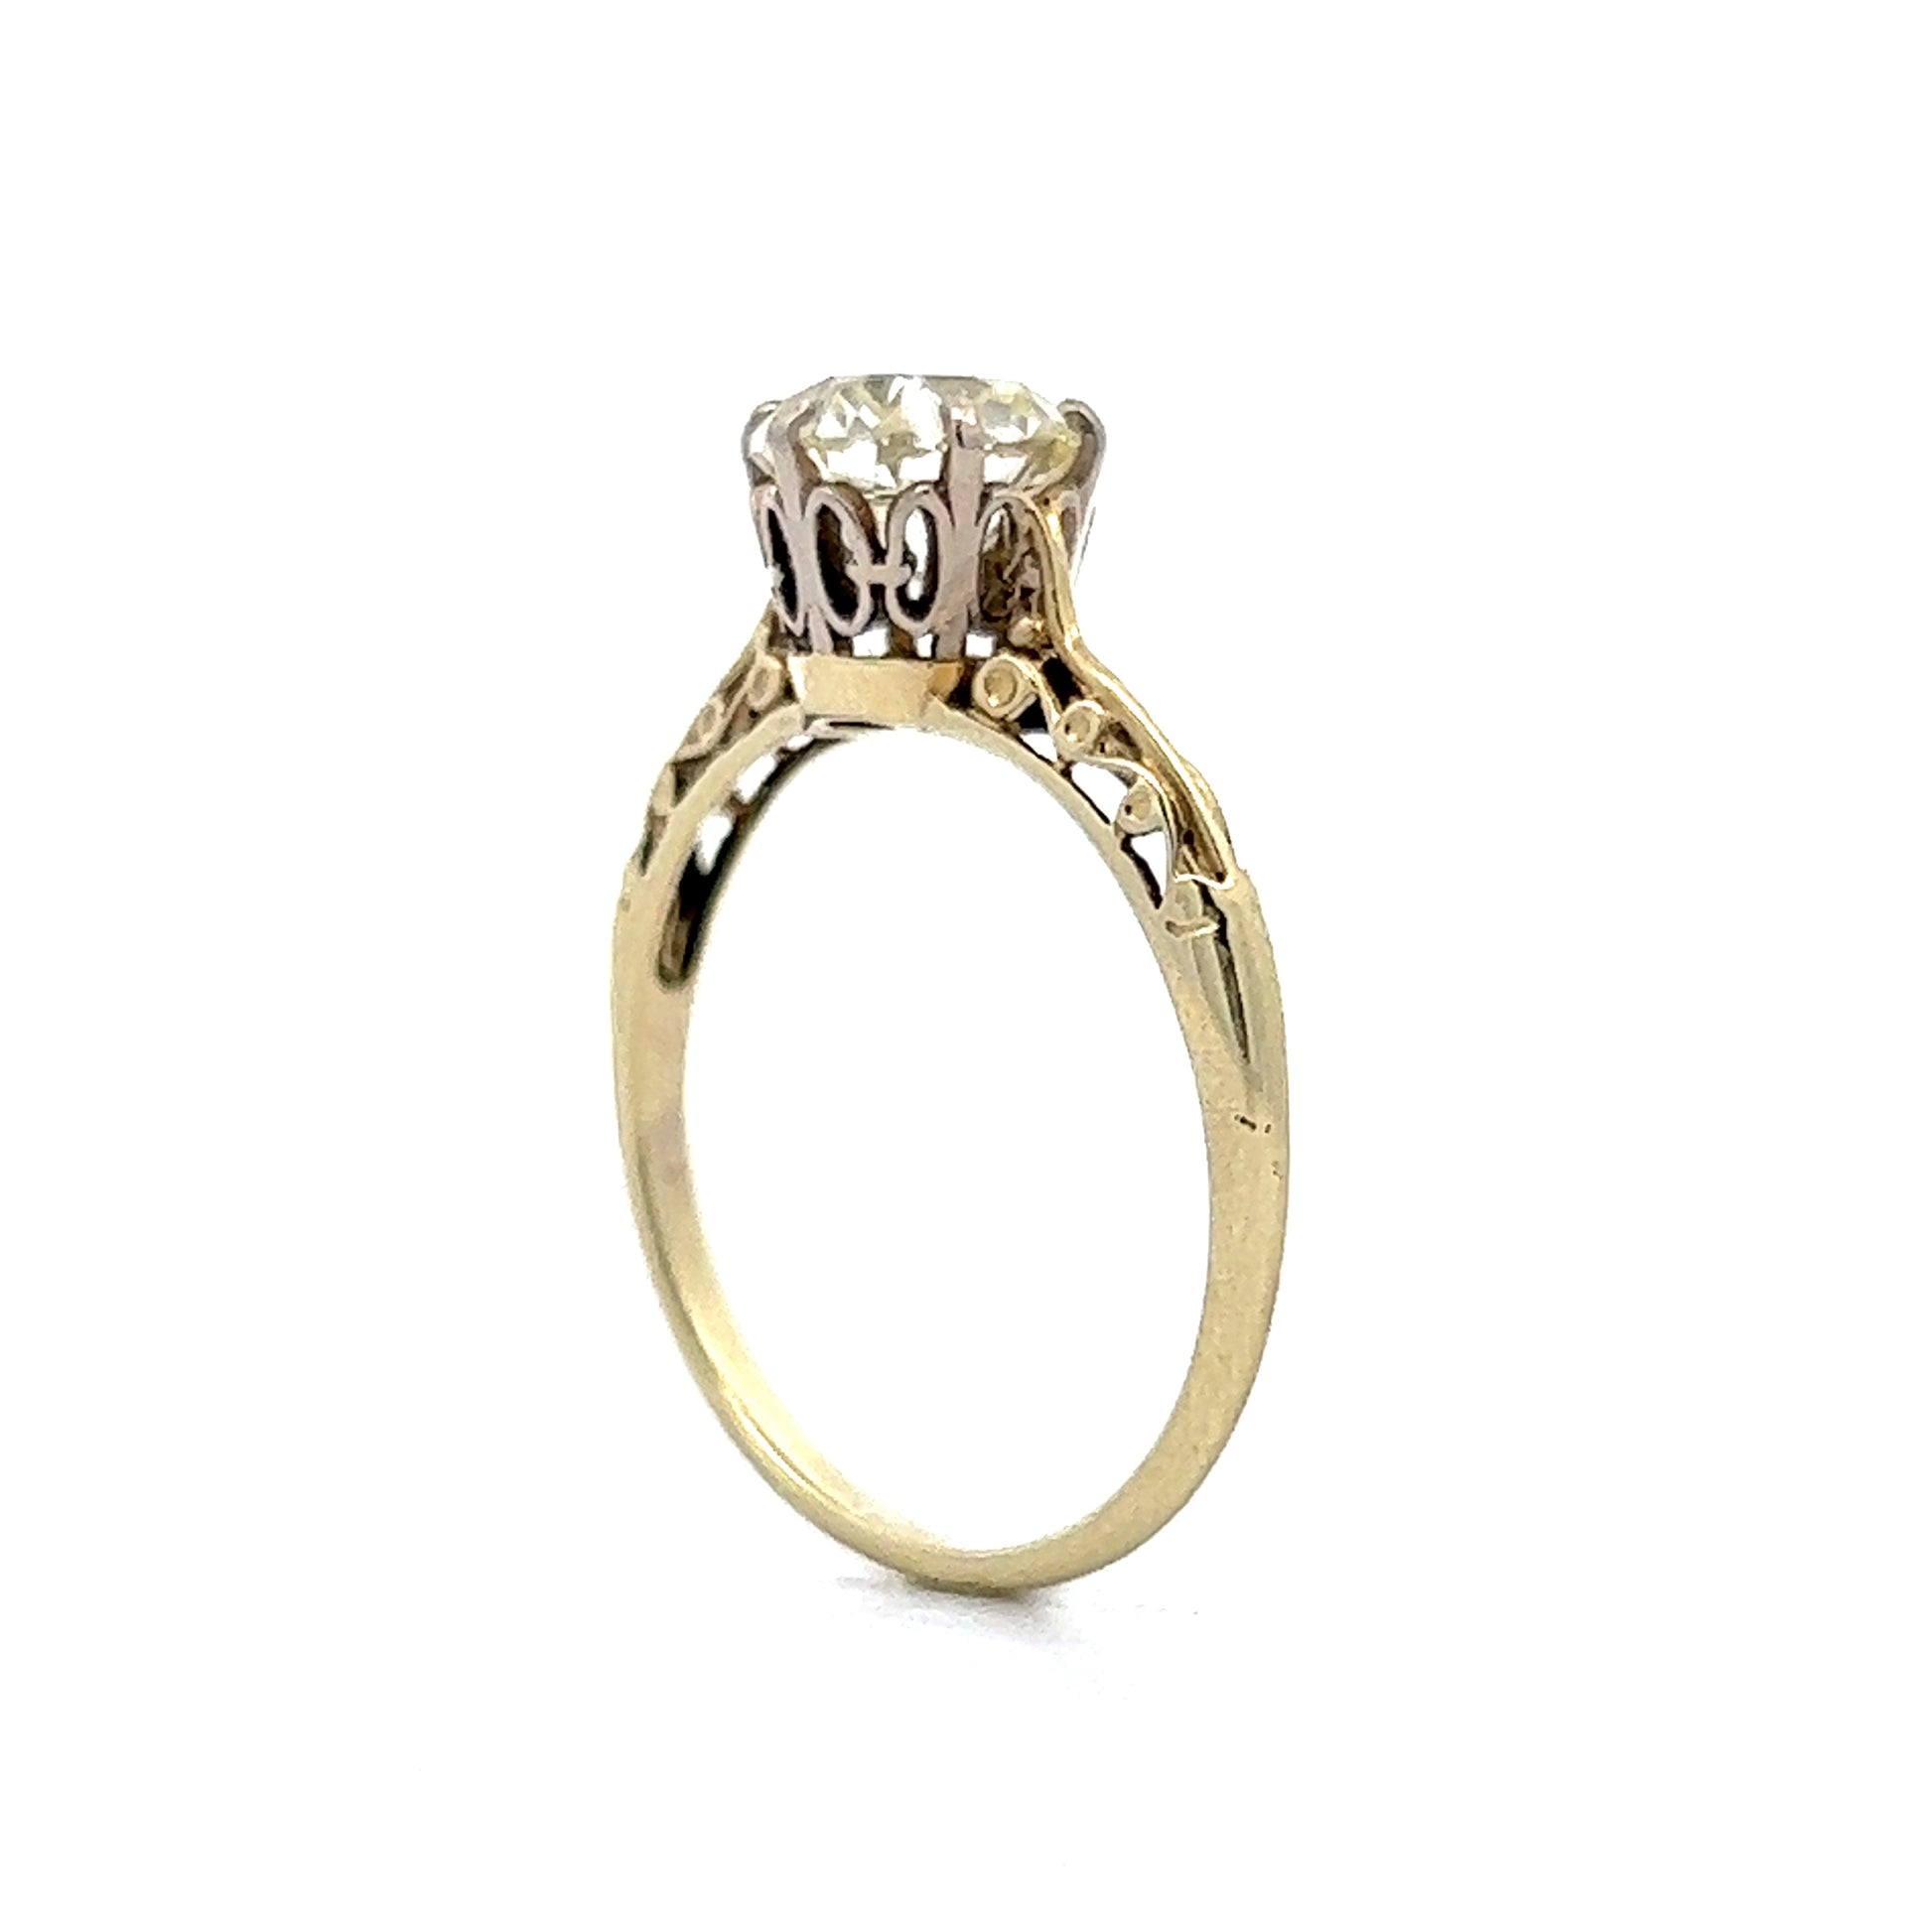 Vintage Art Deco Diamond Engagement Ring in 14k Yellow Gold